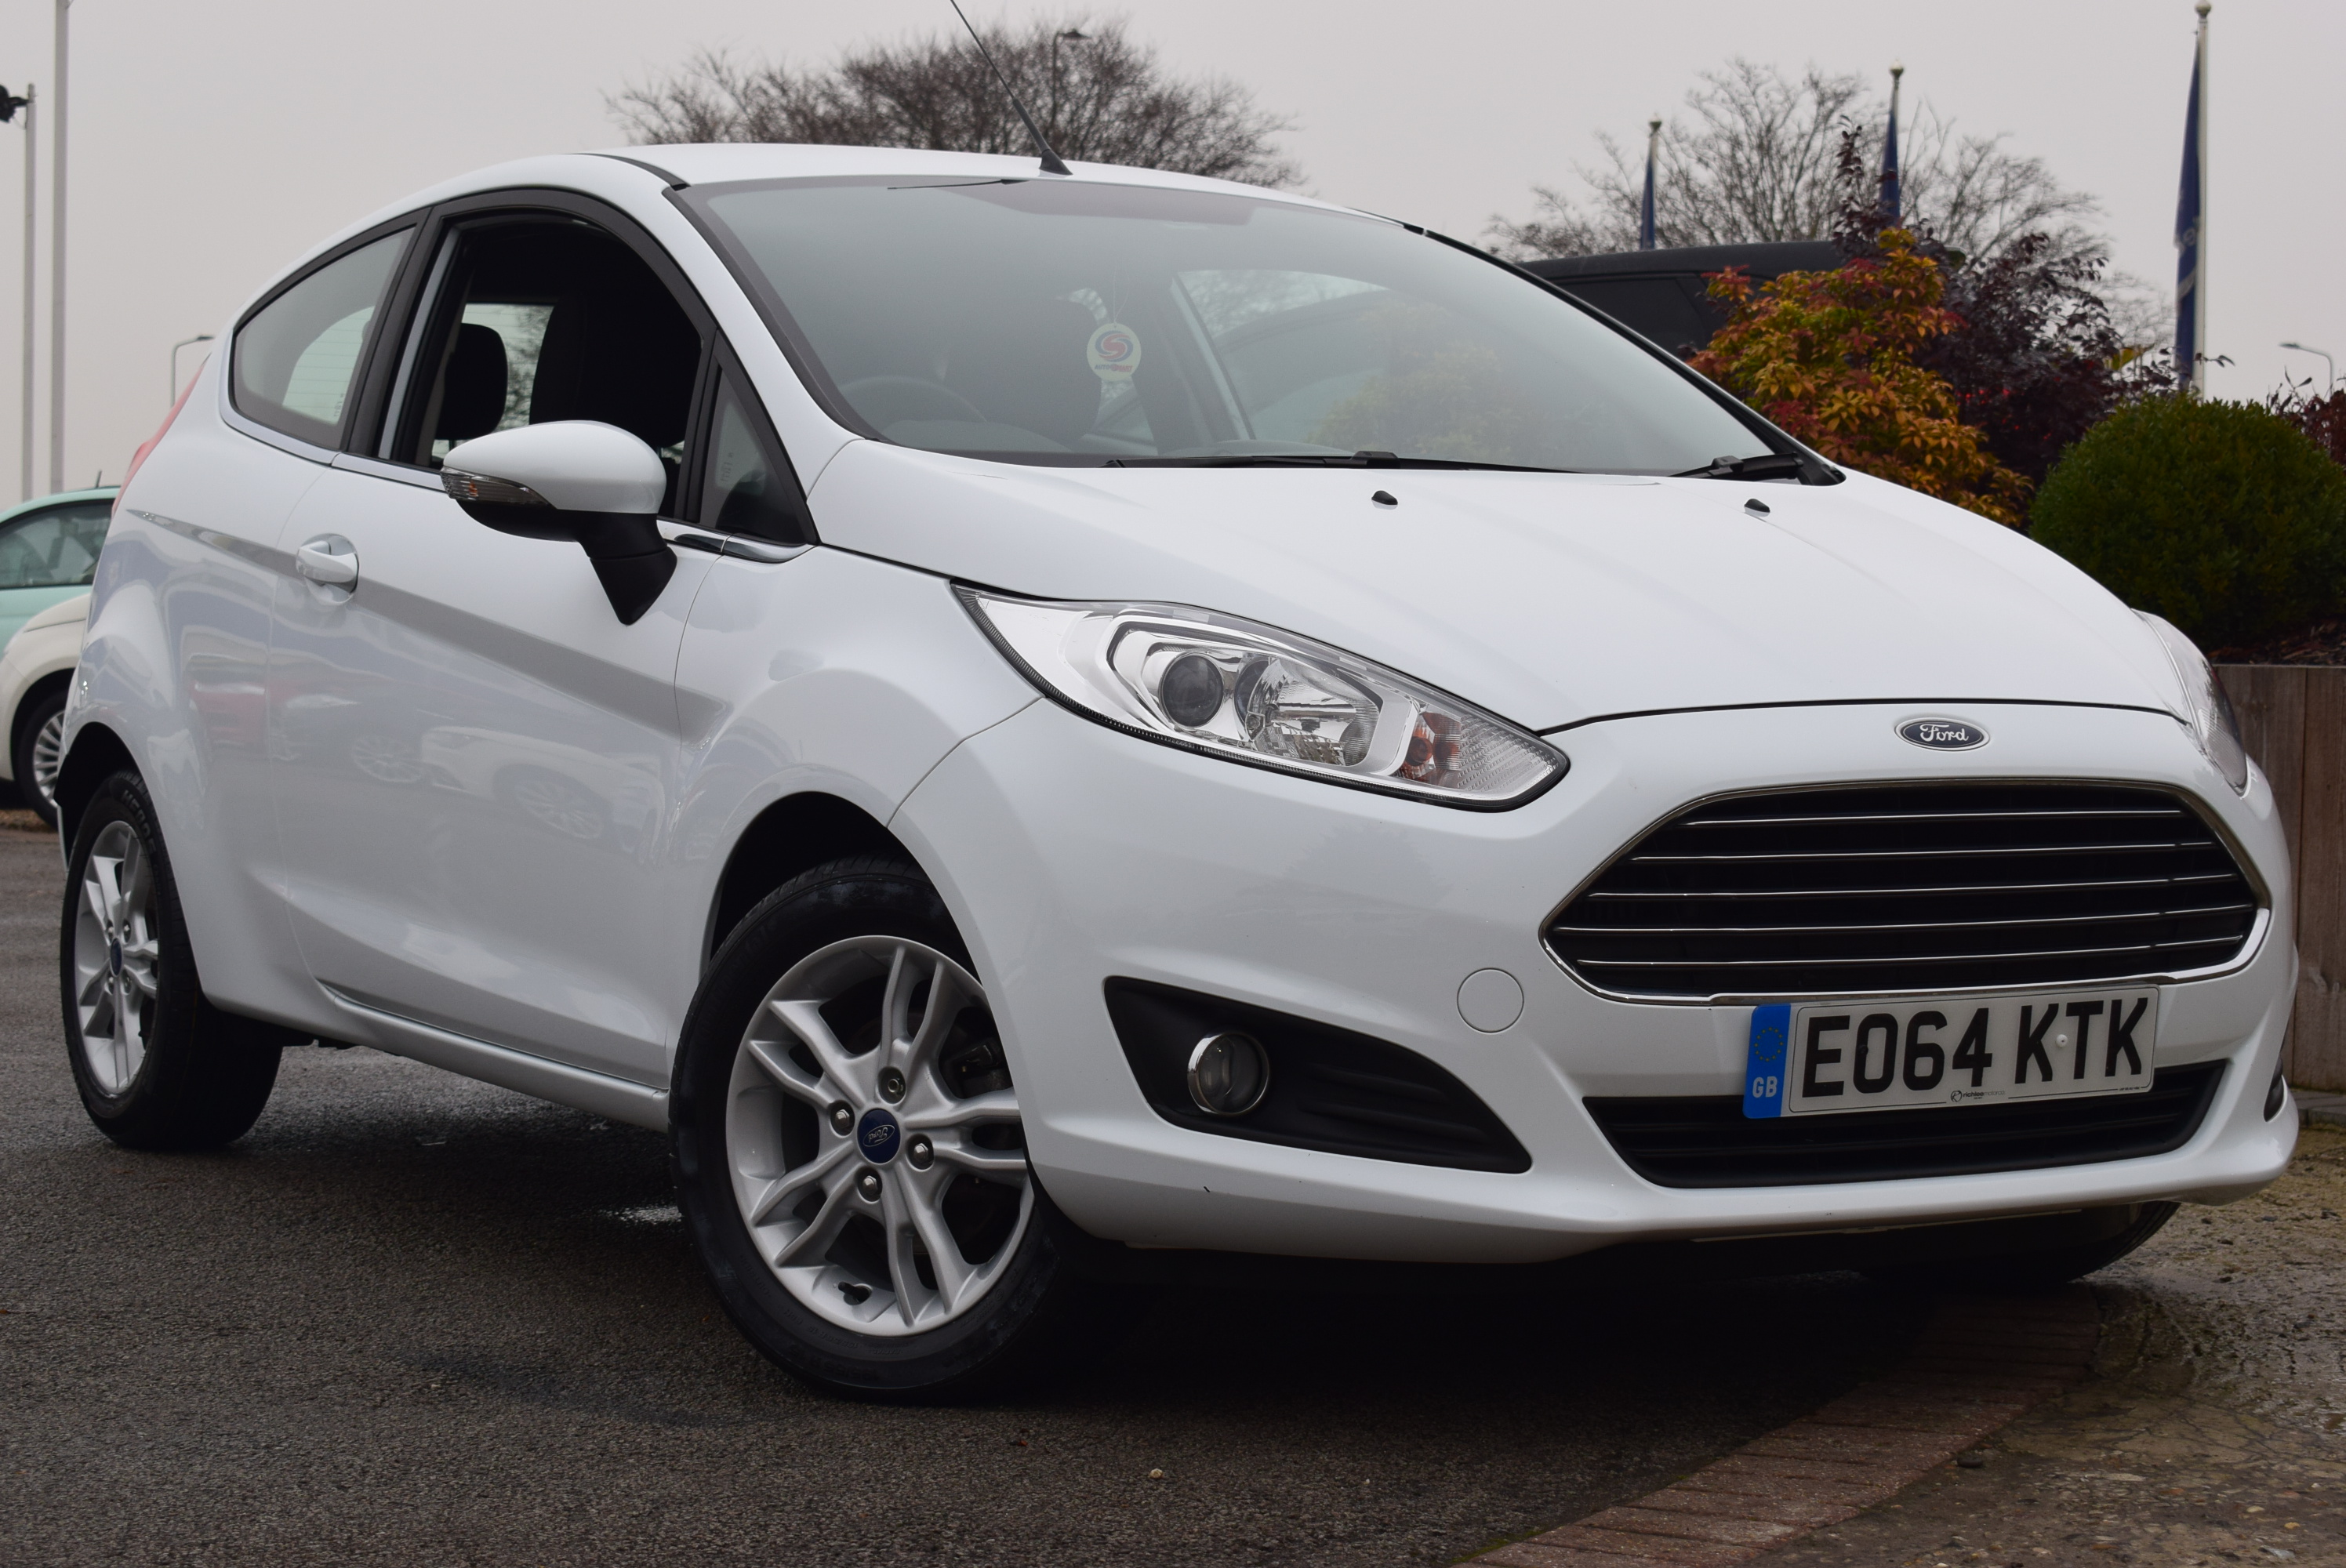 Ford fiesta ecoboost insurance group information